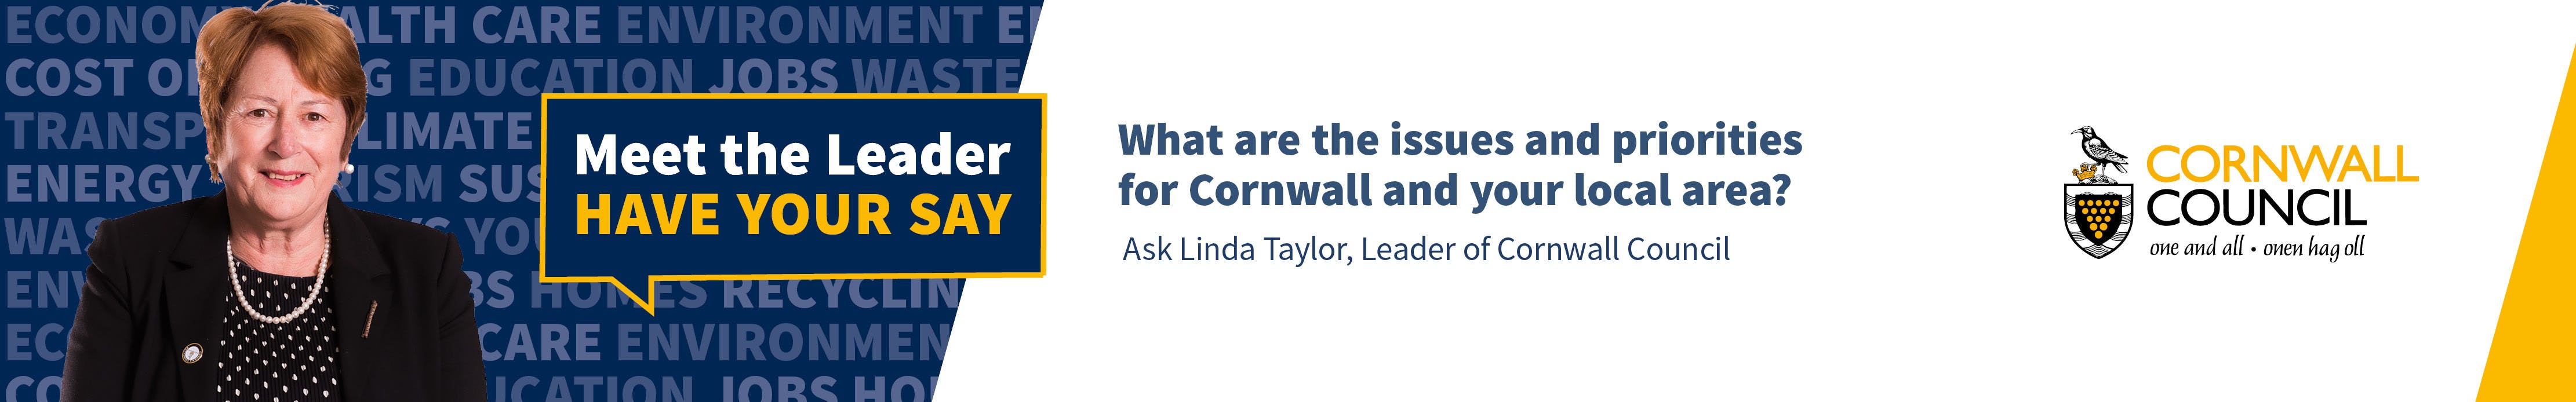 What are the issues and priorities for Cornwall and your local area - ask Linda Taylor, Leader of Cornwall Council